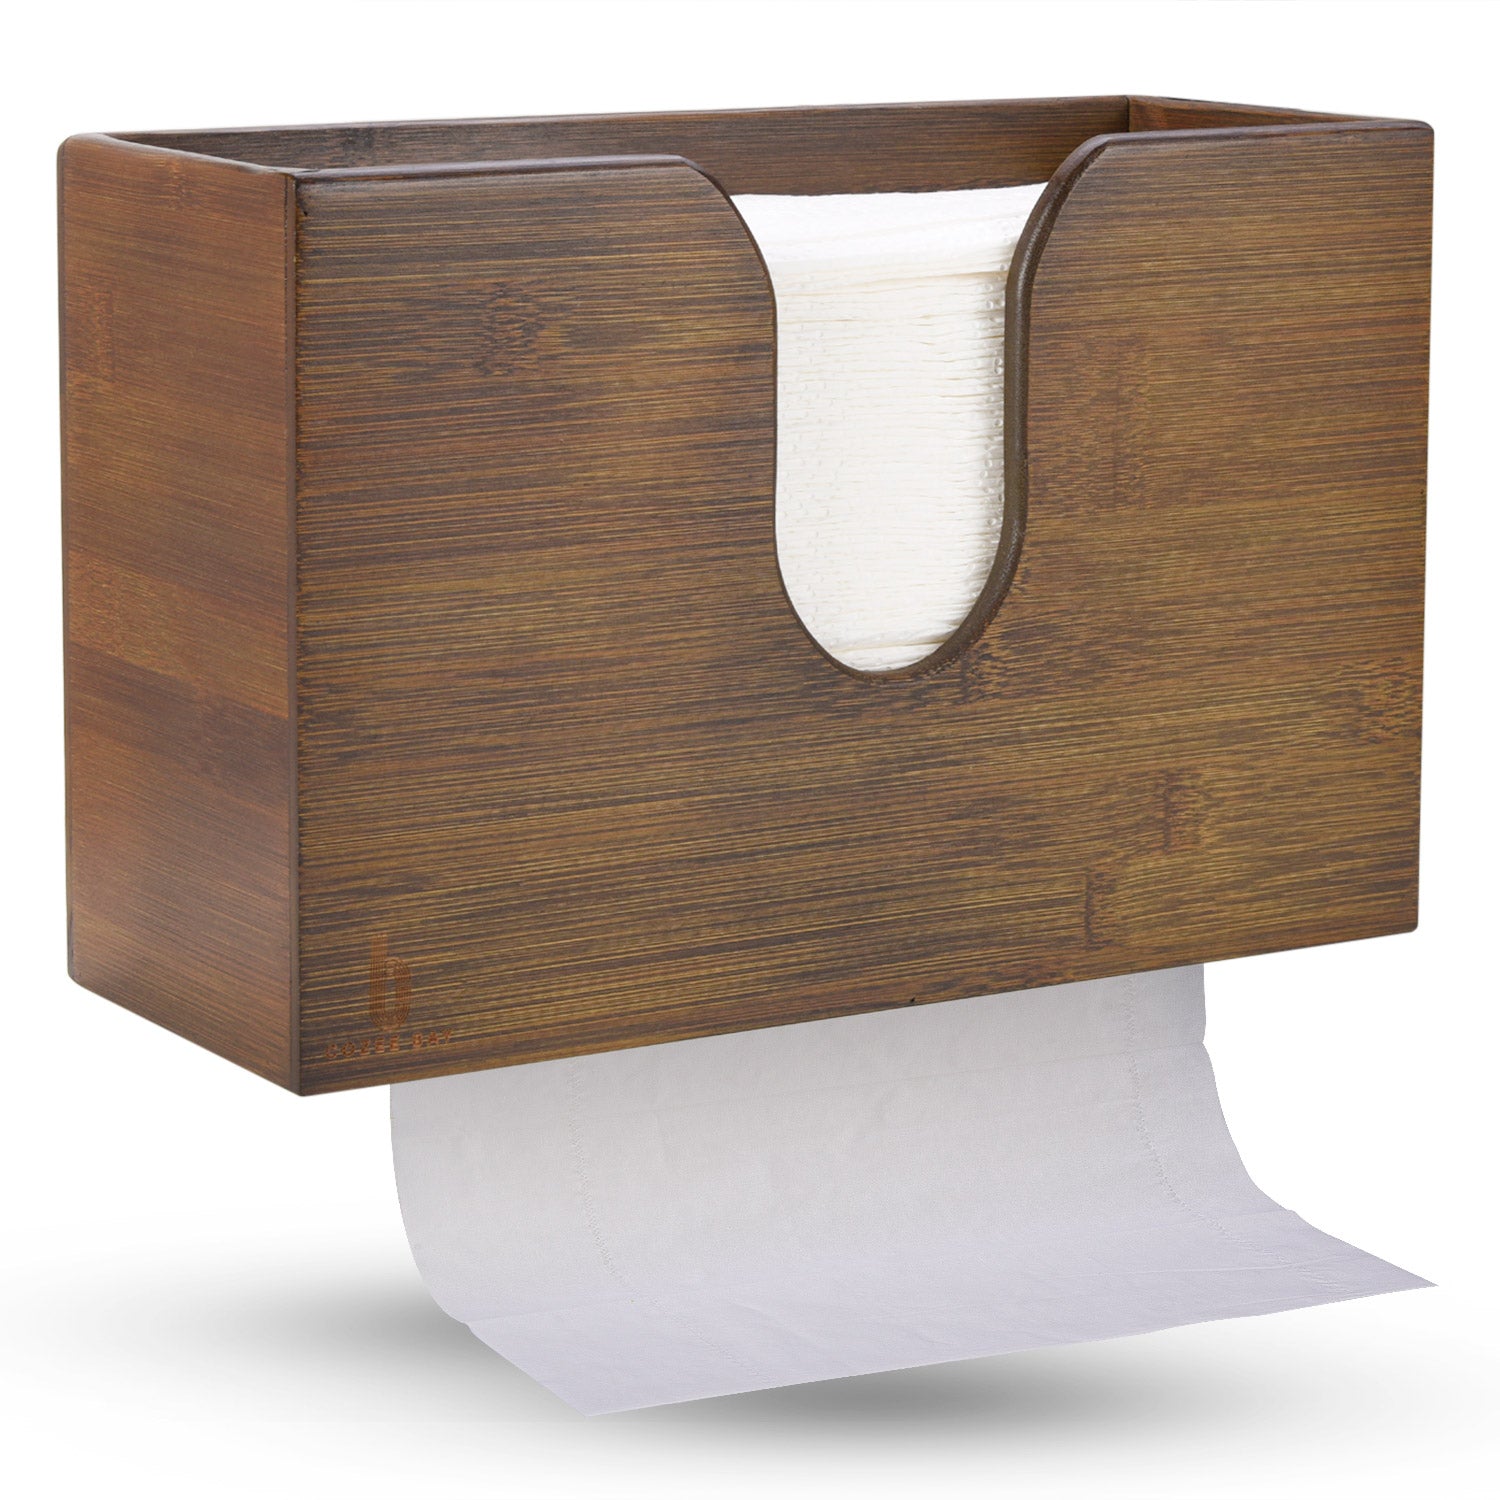 Cozee Bay Paper Towel Dispenser for Kitchen/Bathroom of Home or Commercial, Wall Mount or Countertop